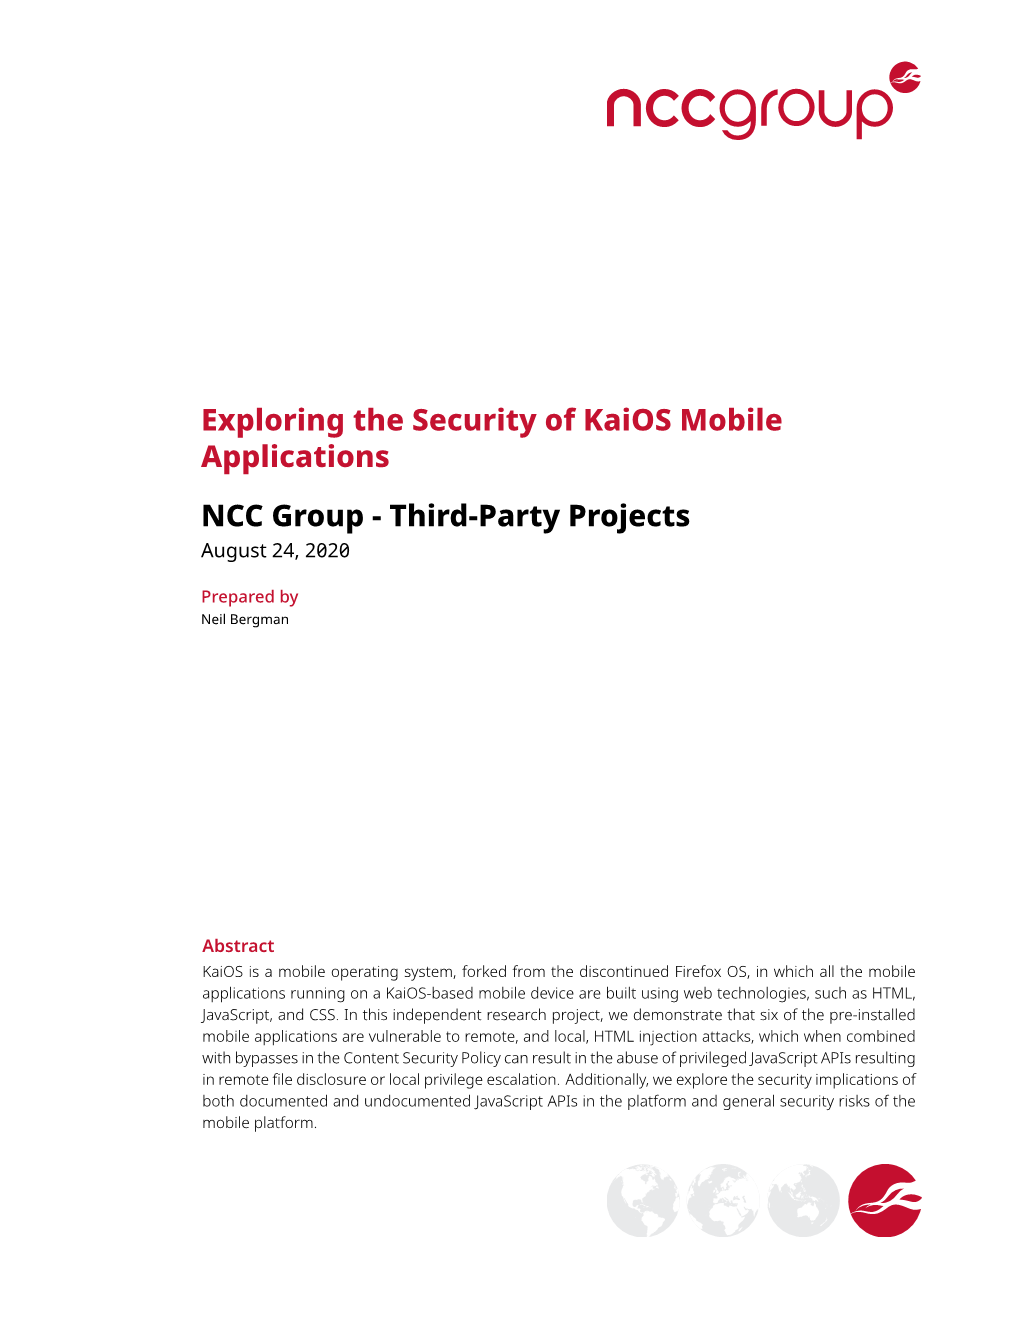 Exploring the Security of Kaios Mobile Applications NCC Group - Third-Party Projects August 24, 2020